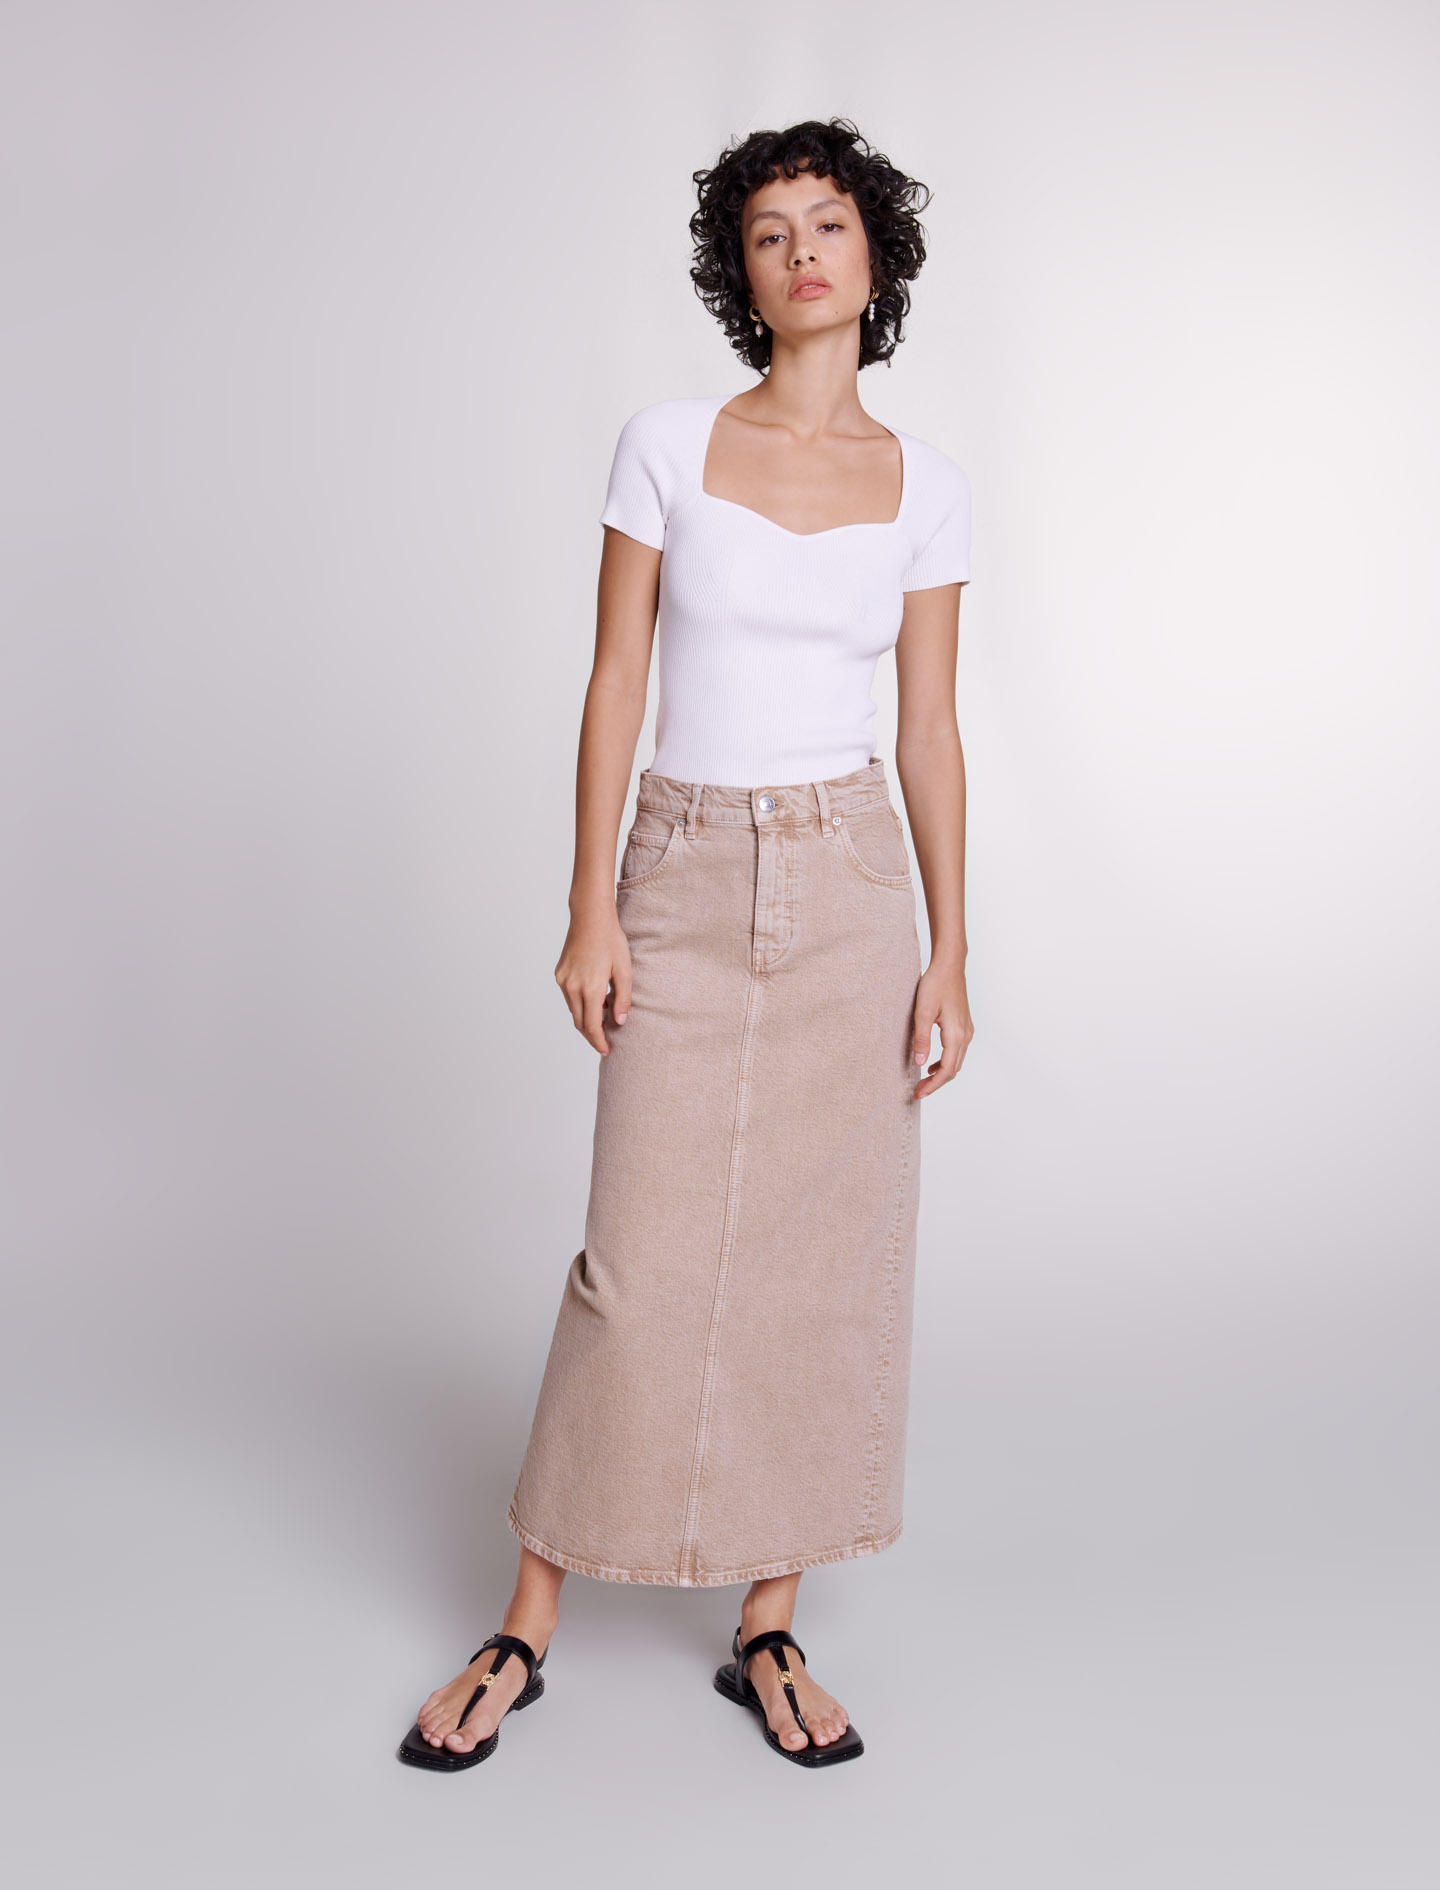 Maje Woman's cotton, Long denim skirt for Spring/Summer, in color Brown / Brown